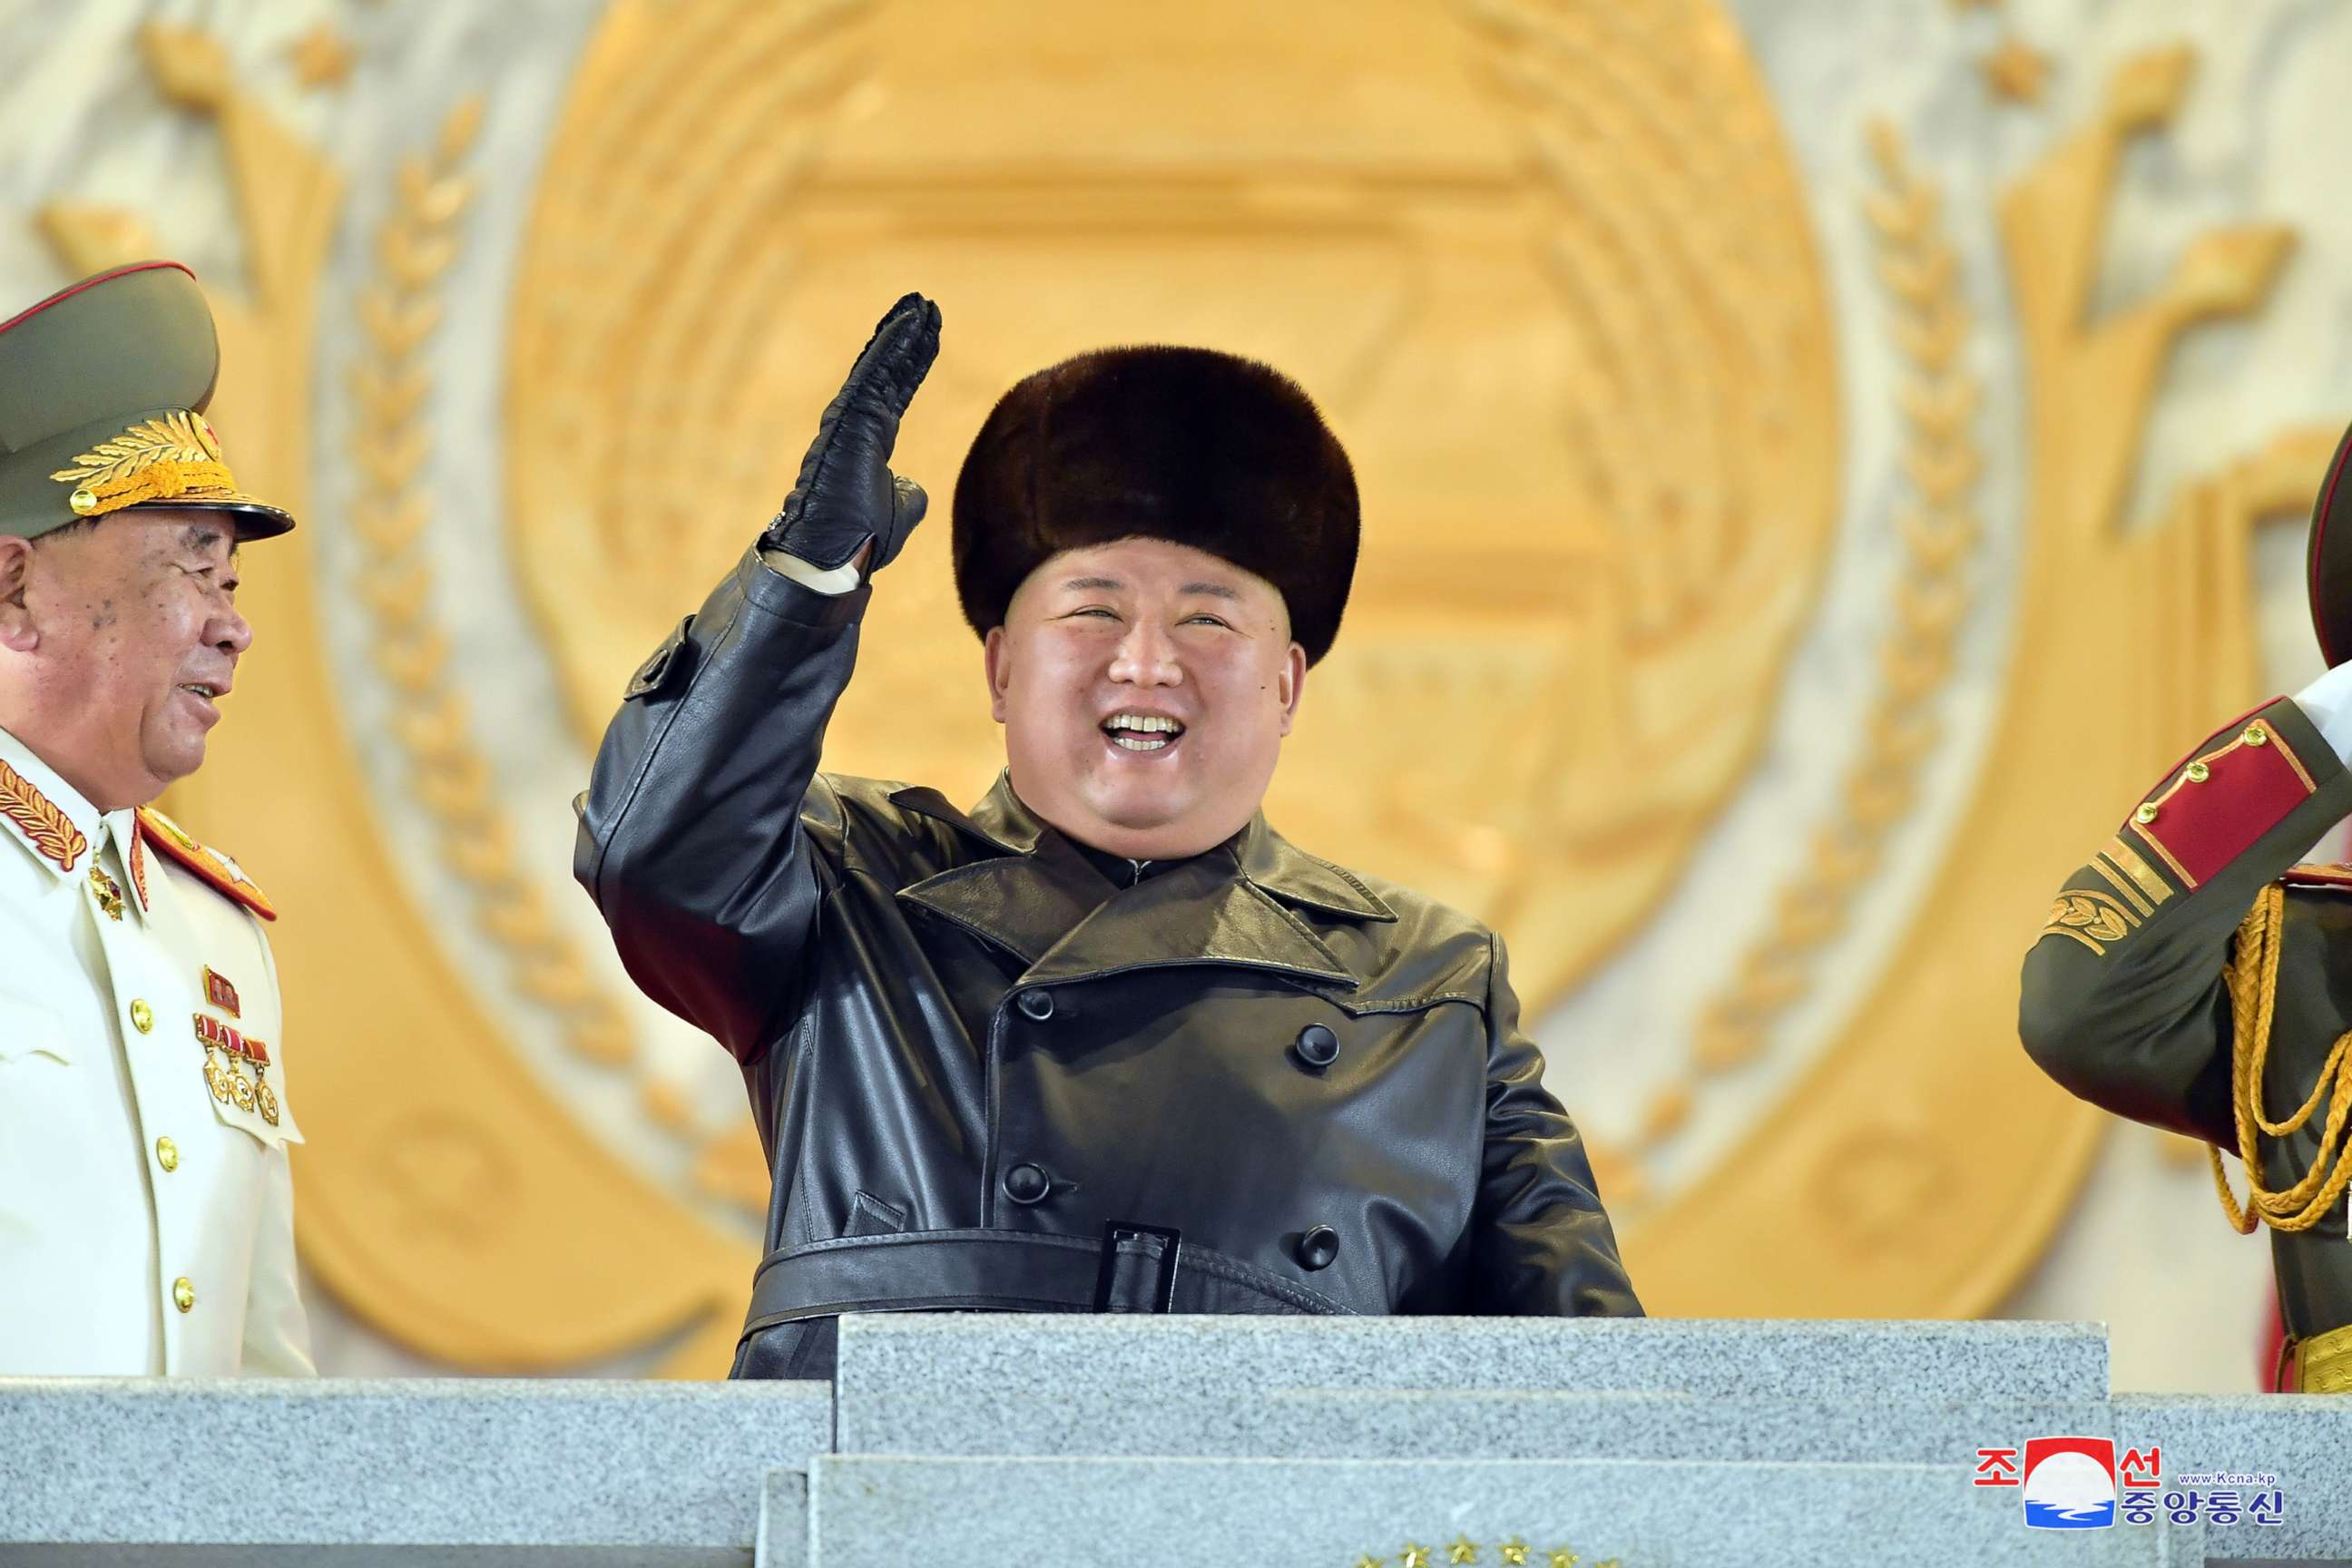 PHOTO: North Korean leader Kim Jong Un waves during a ceremony for the 8th Congress of the Workers' Party in Pyongyang, North Korea, Jan. 14, 2021.